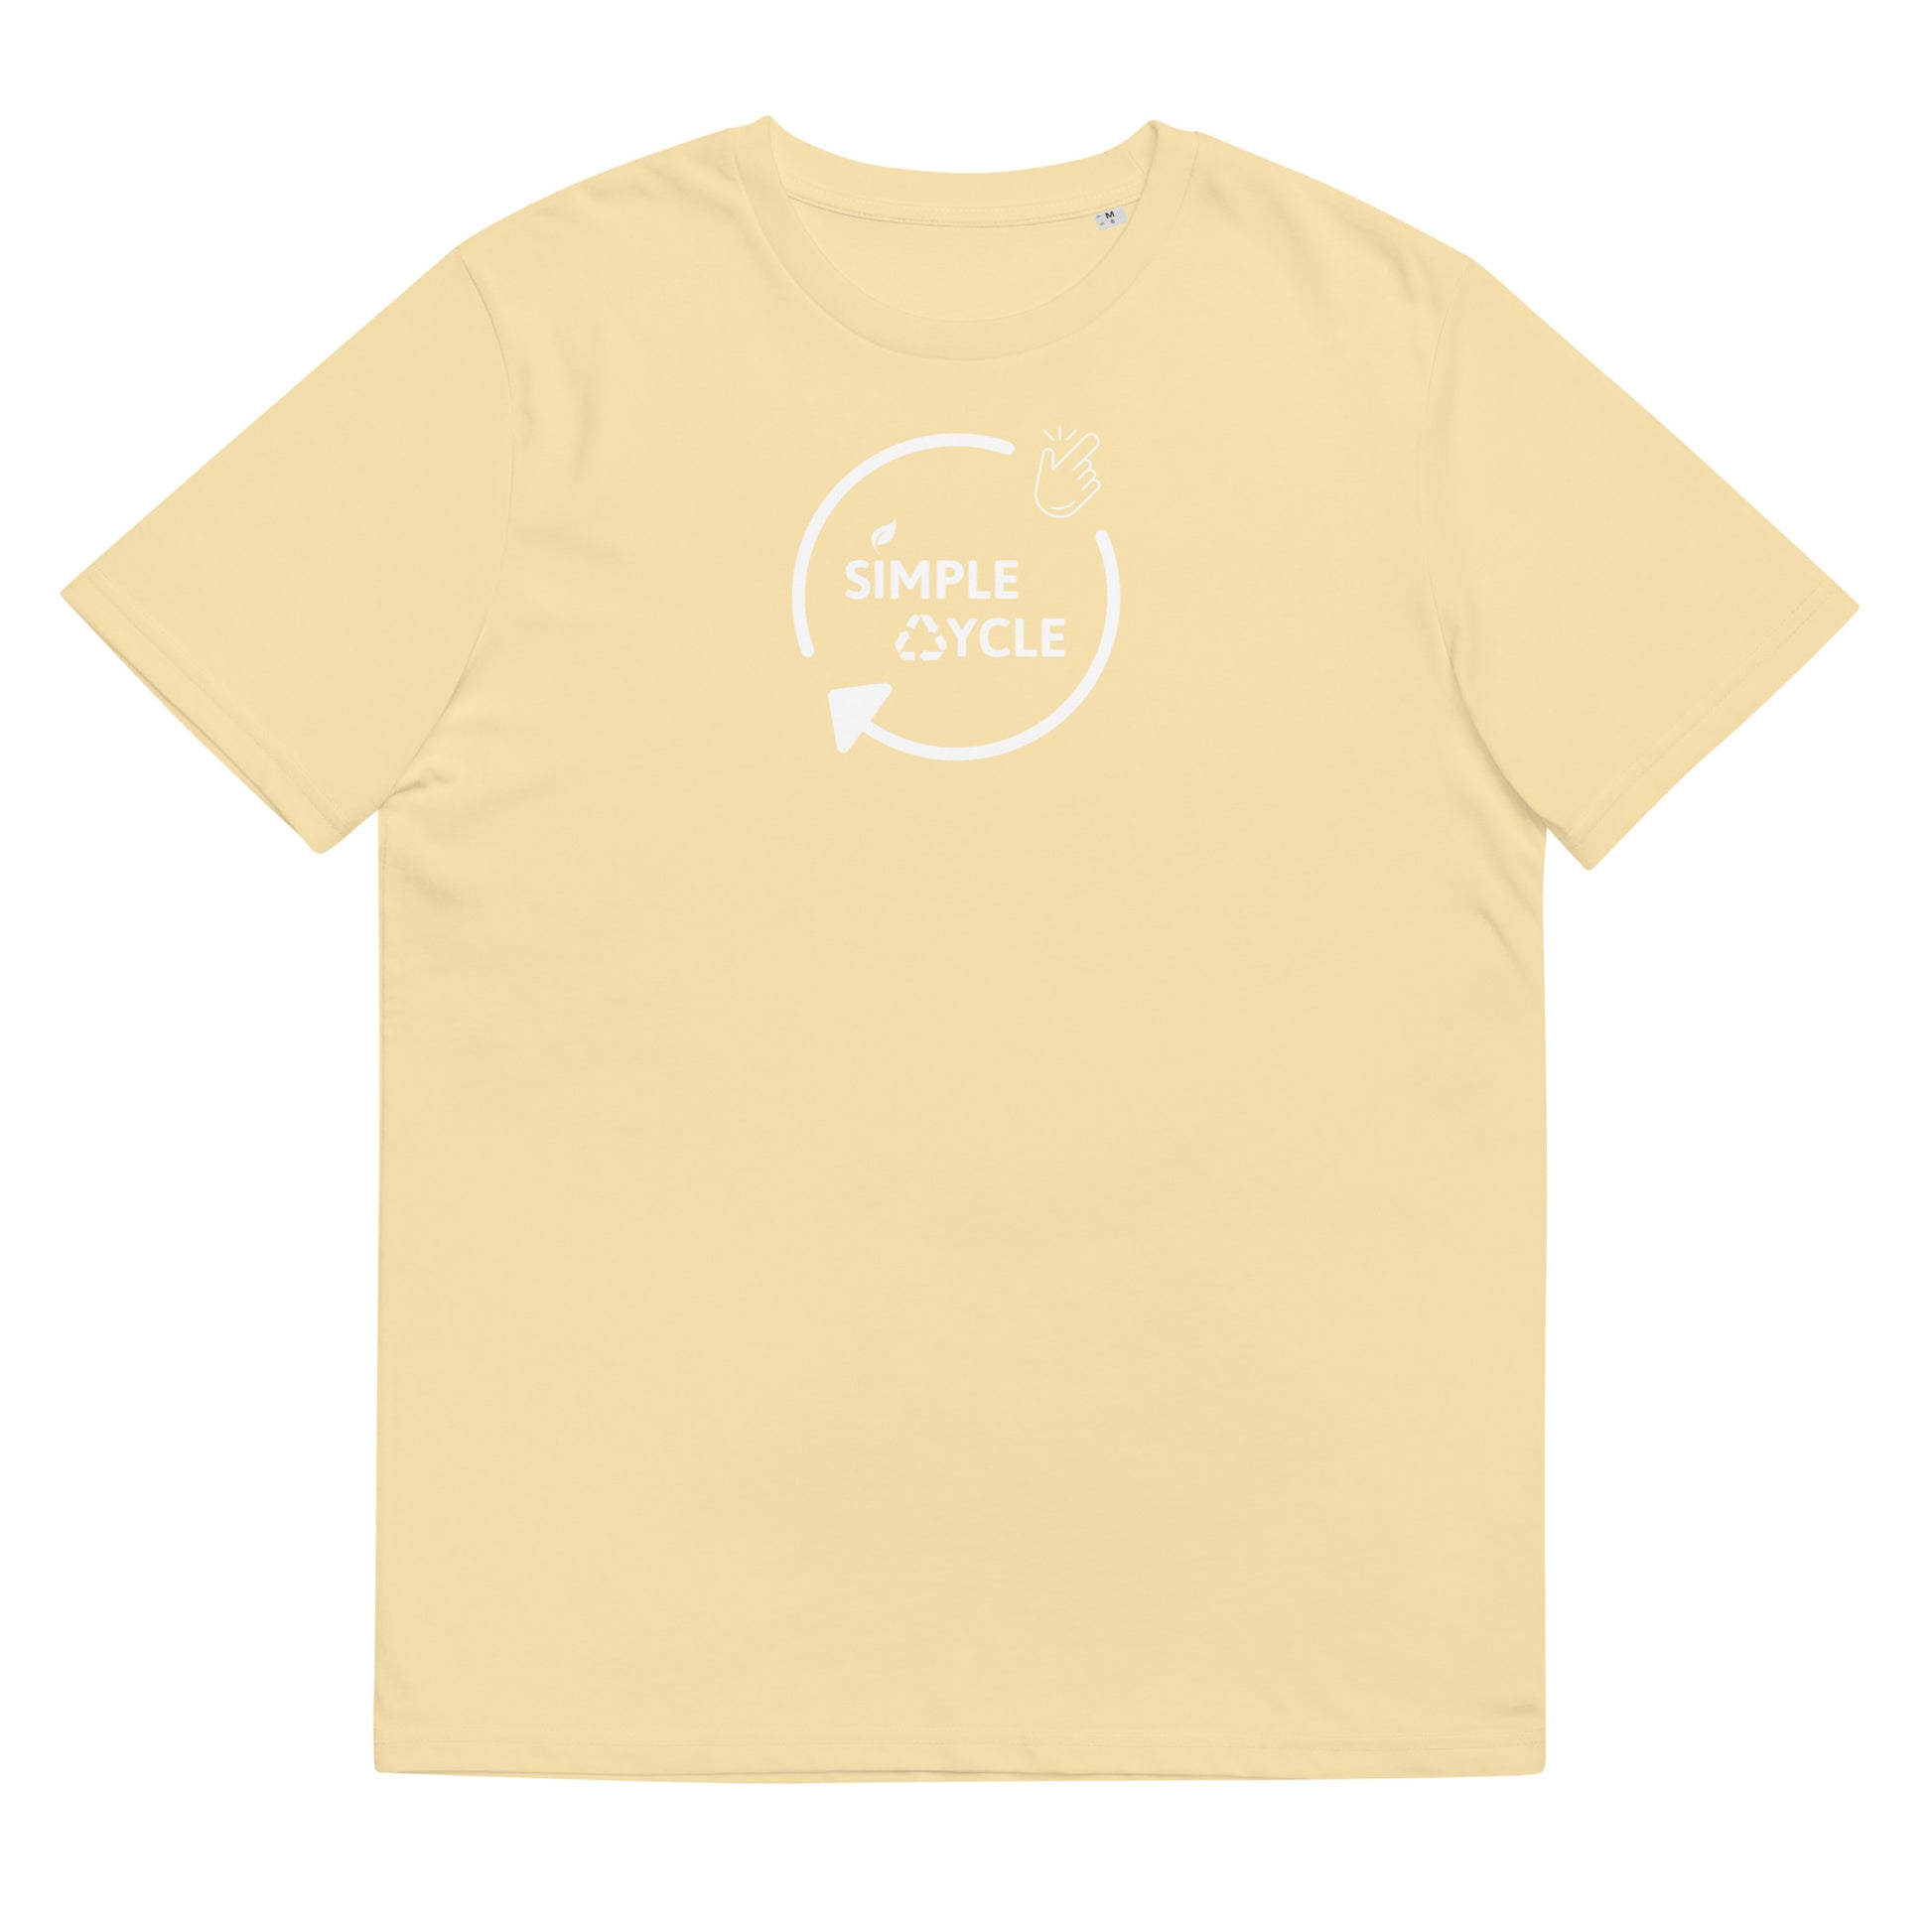 SimpleCycle Unisex Organic Cotton T-Shirt butter